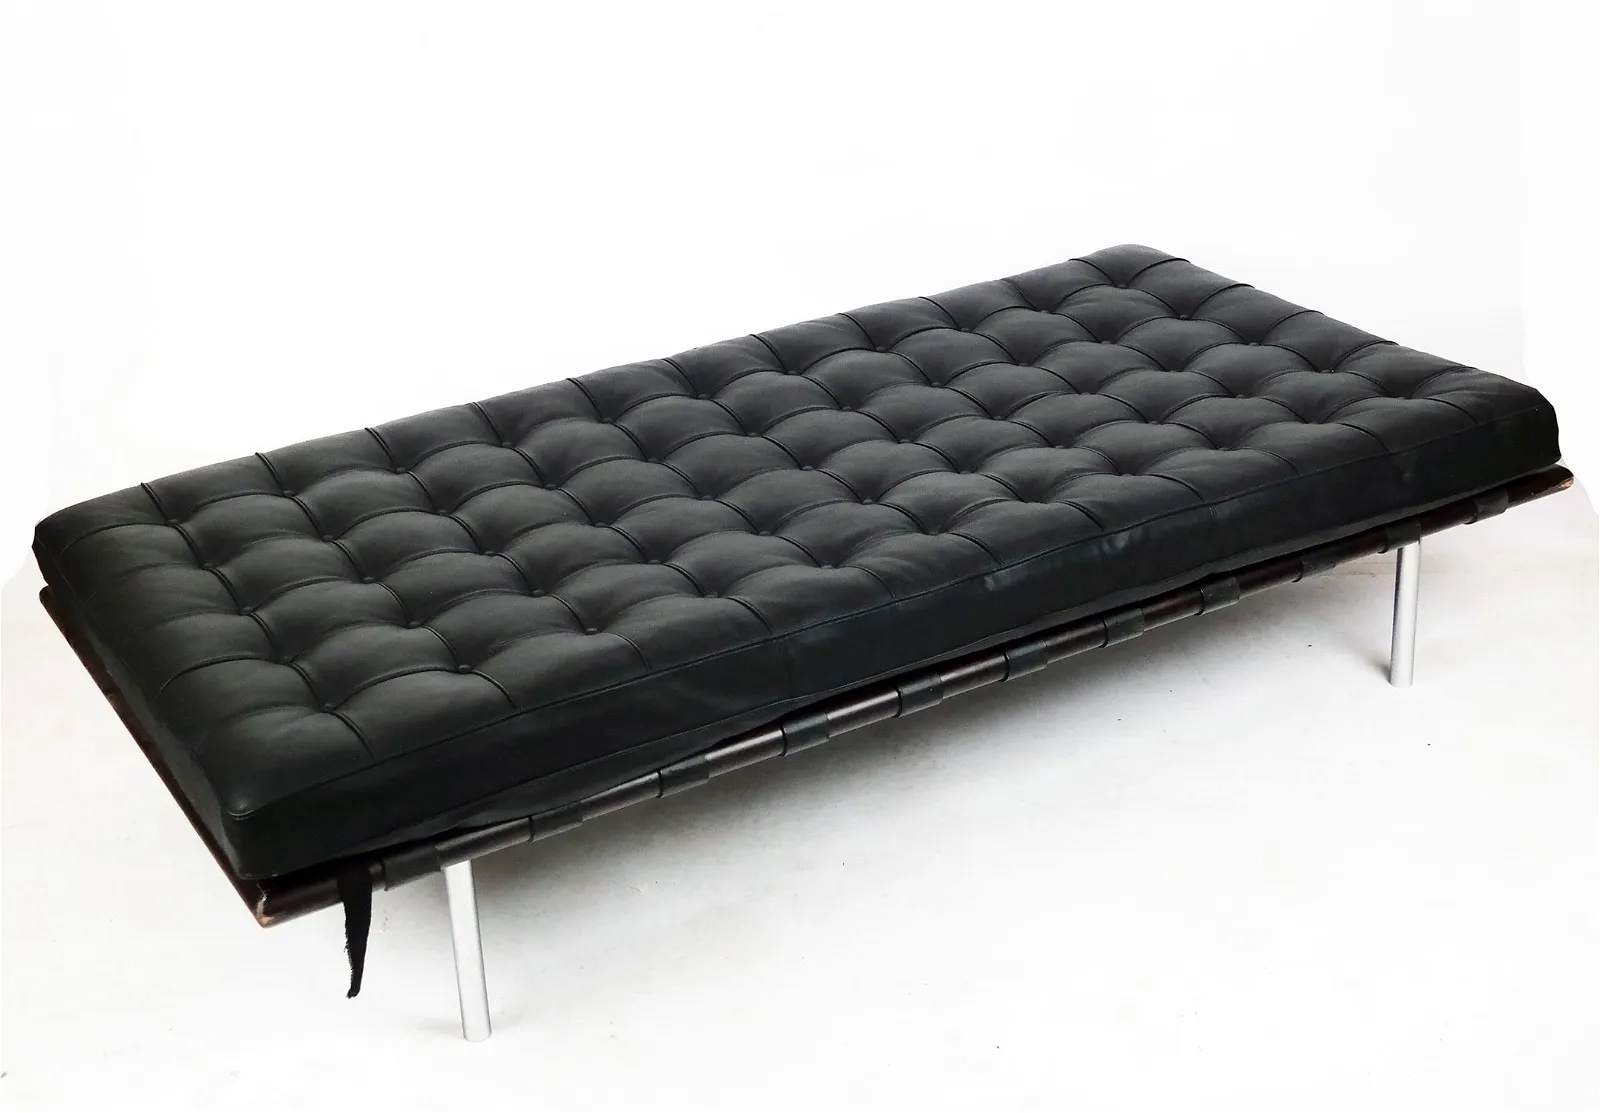 Ludwig Mies van der Rohe for Knoll Barcelona daybed, estimated at $1,000-$1,500 at Roland NY.
